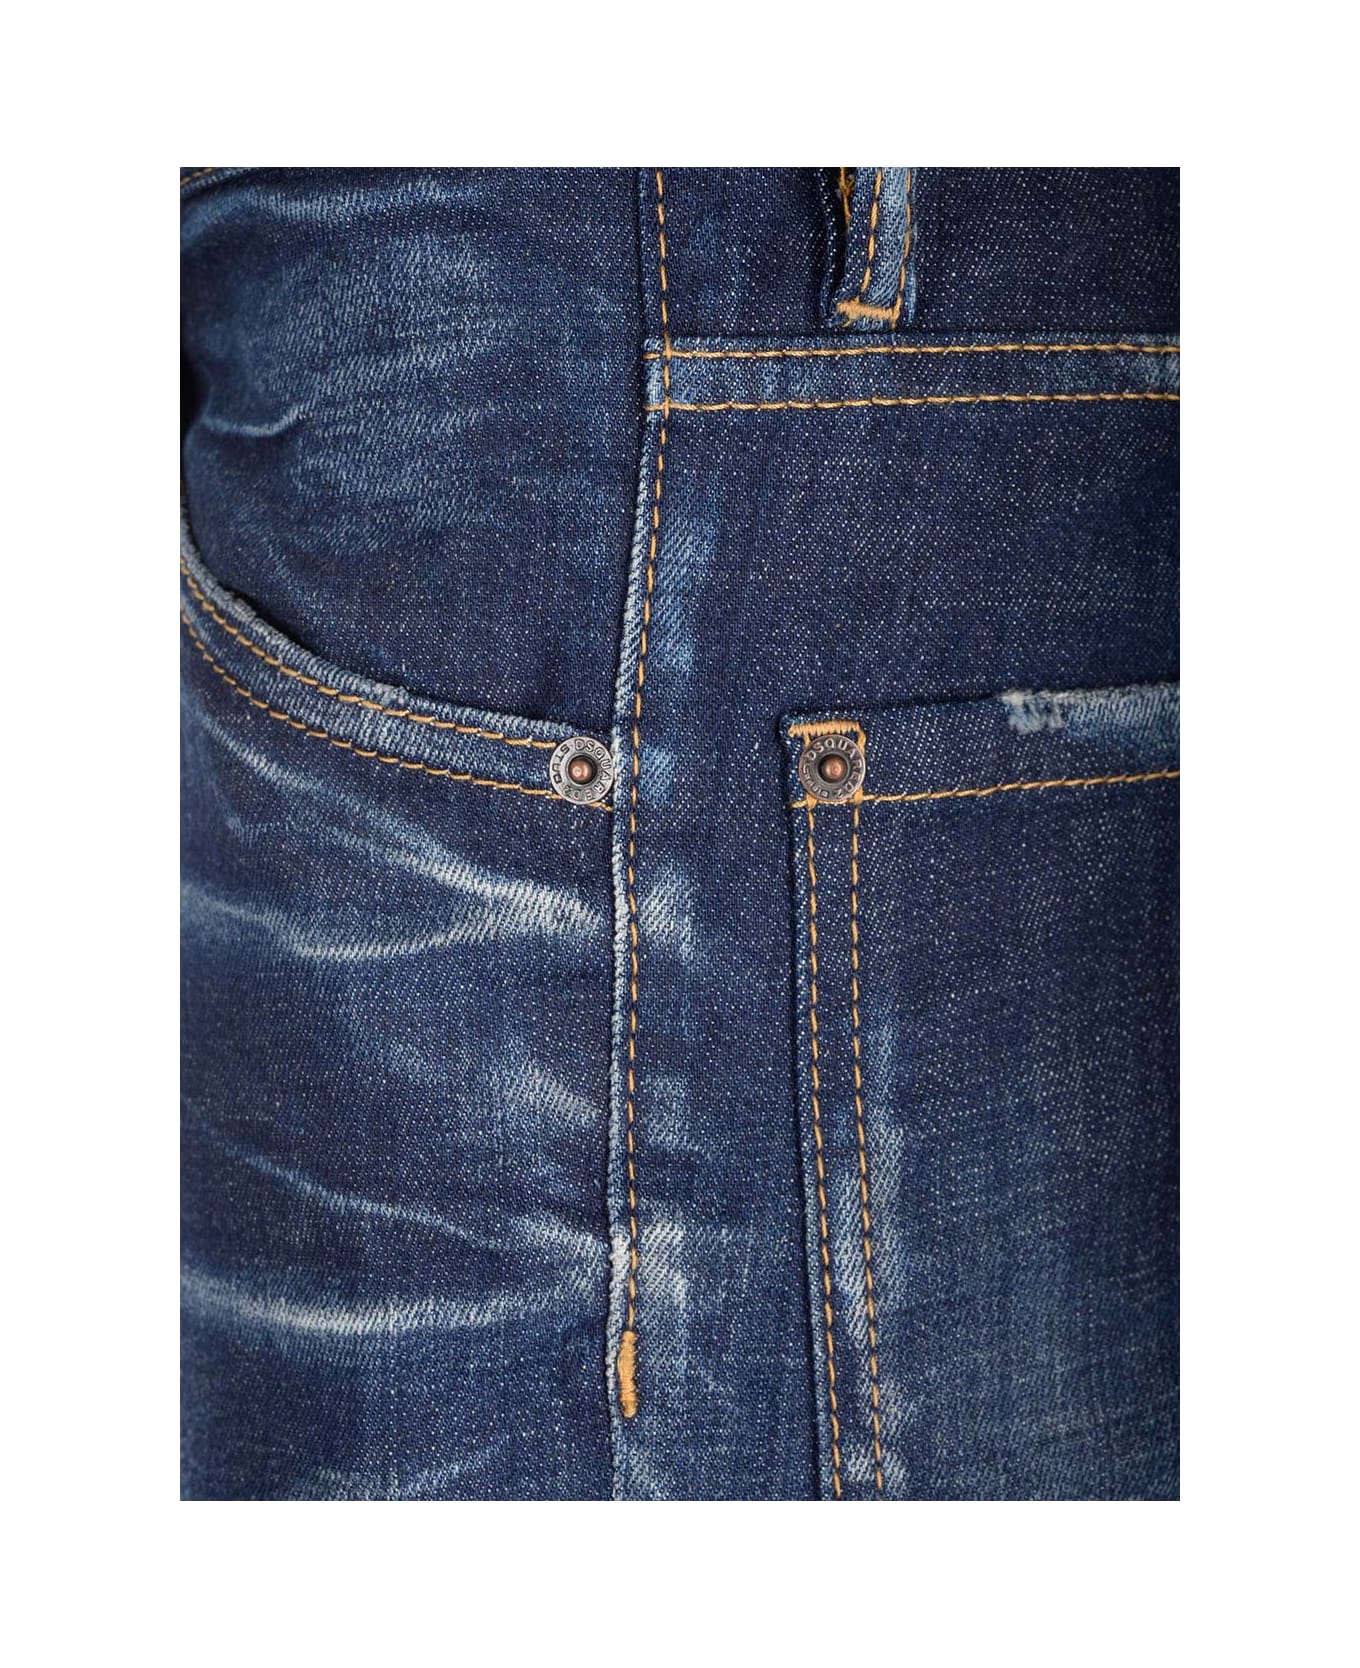 Dsquared2 Dark Wash 'cool Guy' Jeans - Navy Blue